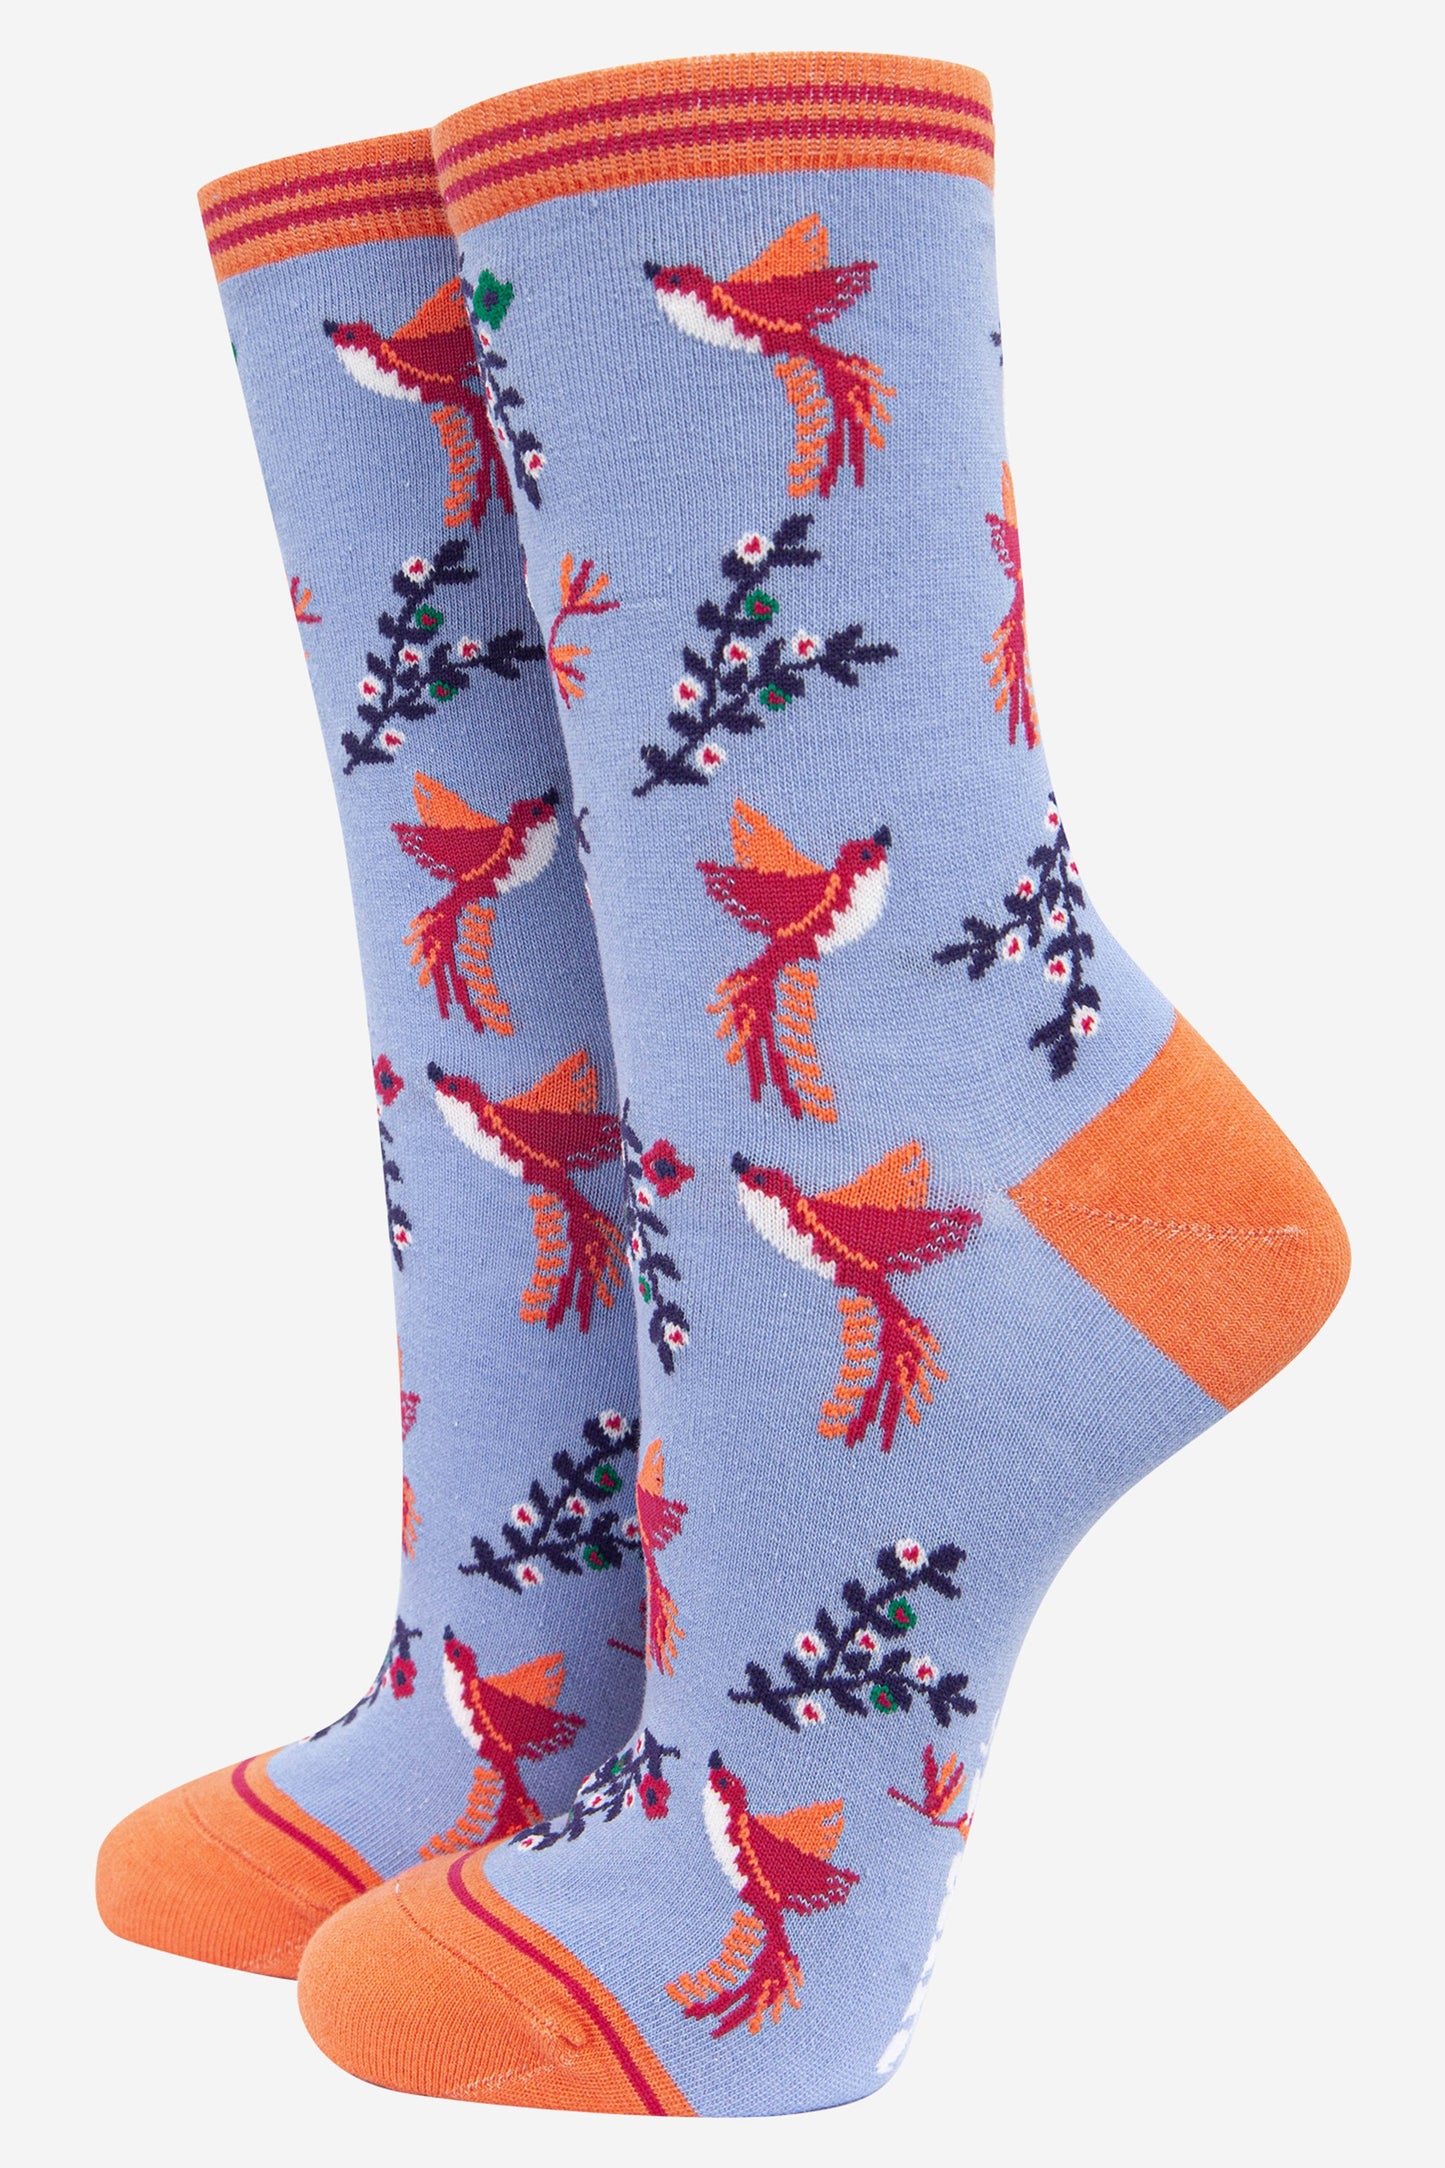 lilac blue ankle socks with orange toe and heel featuring a pattern of pink and orange hummingbirds and floral vines